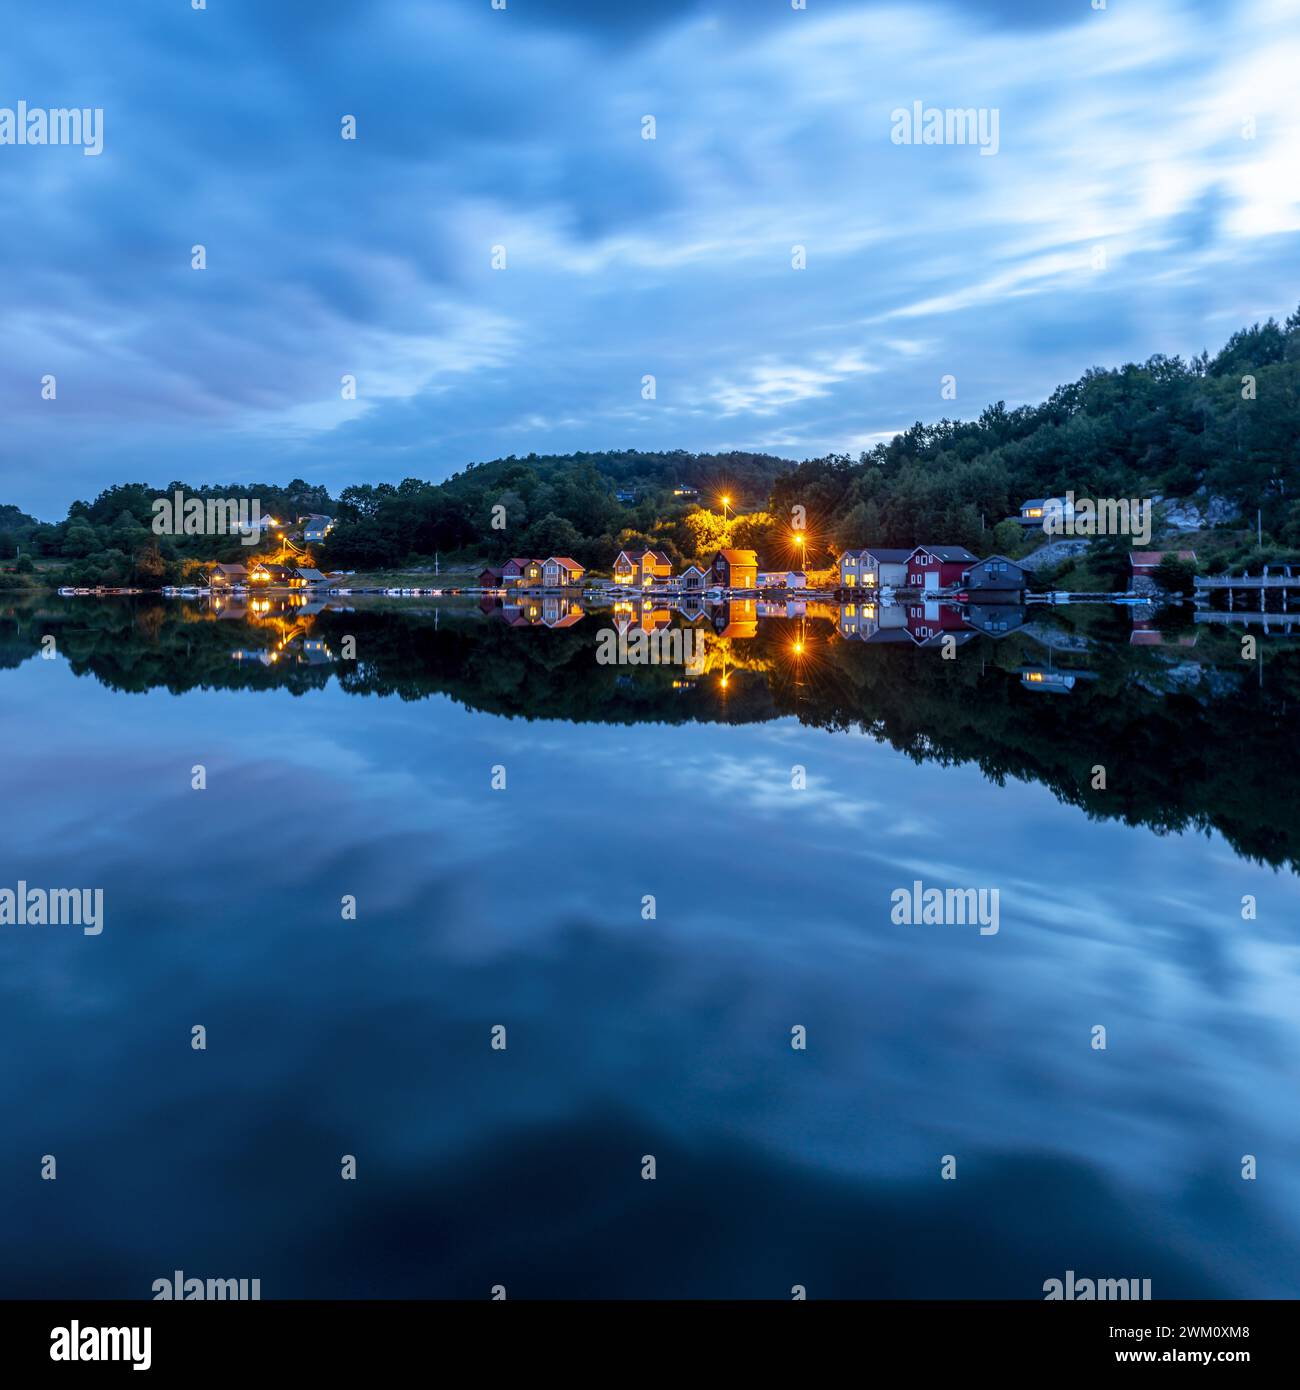 In the evening, the lights of the shore development are reflected in a mirror-smooth lake under a blue, spectacularly cloudy sky. Stock Photo